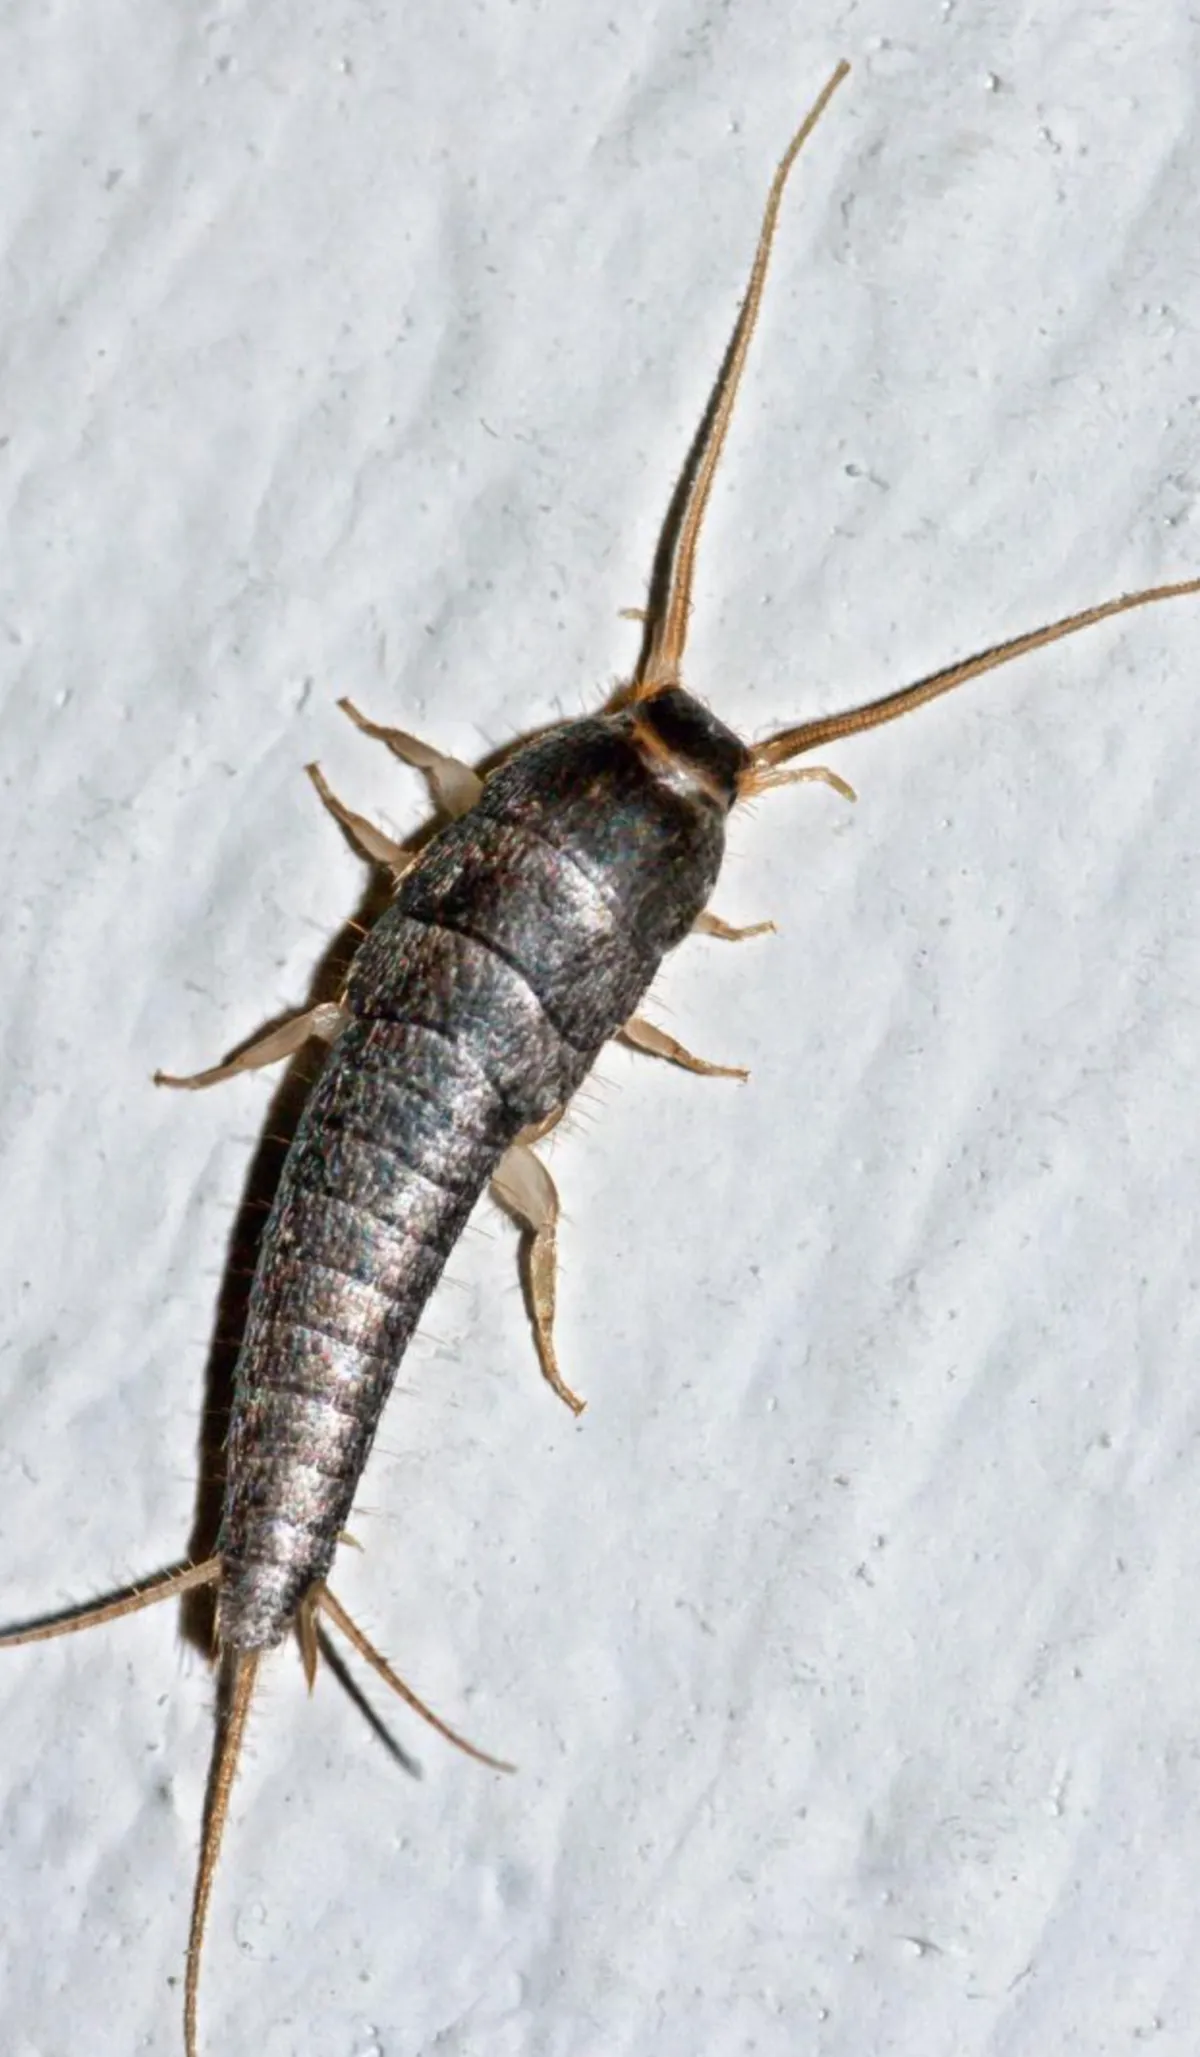 a close up photograph of a silverfish crawling on a white surface